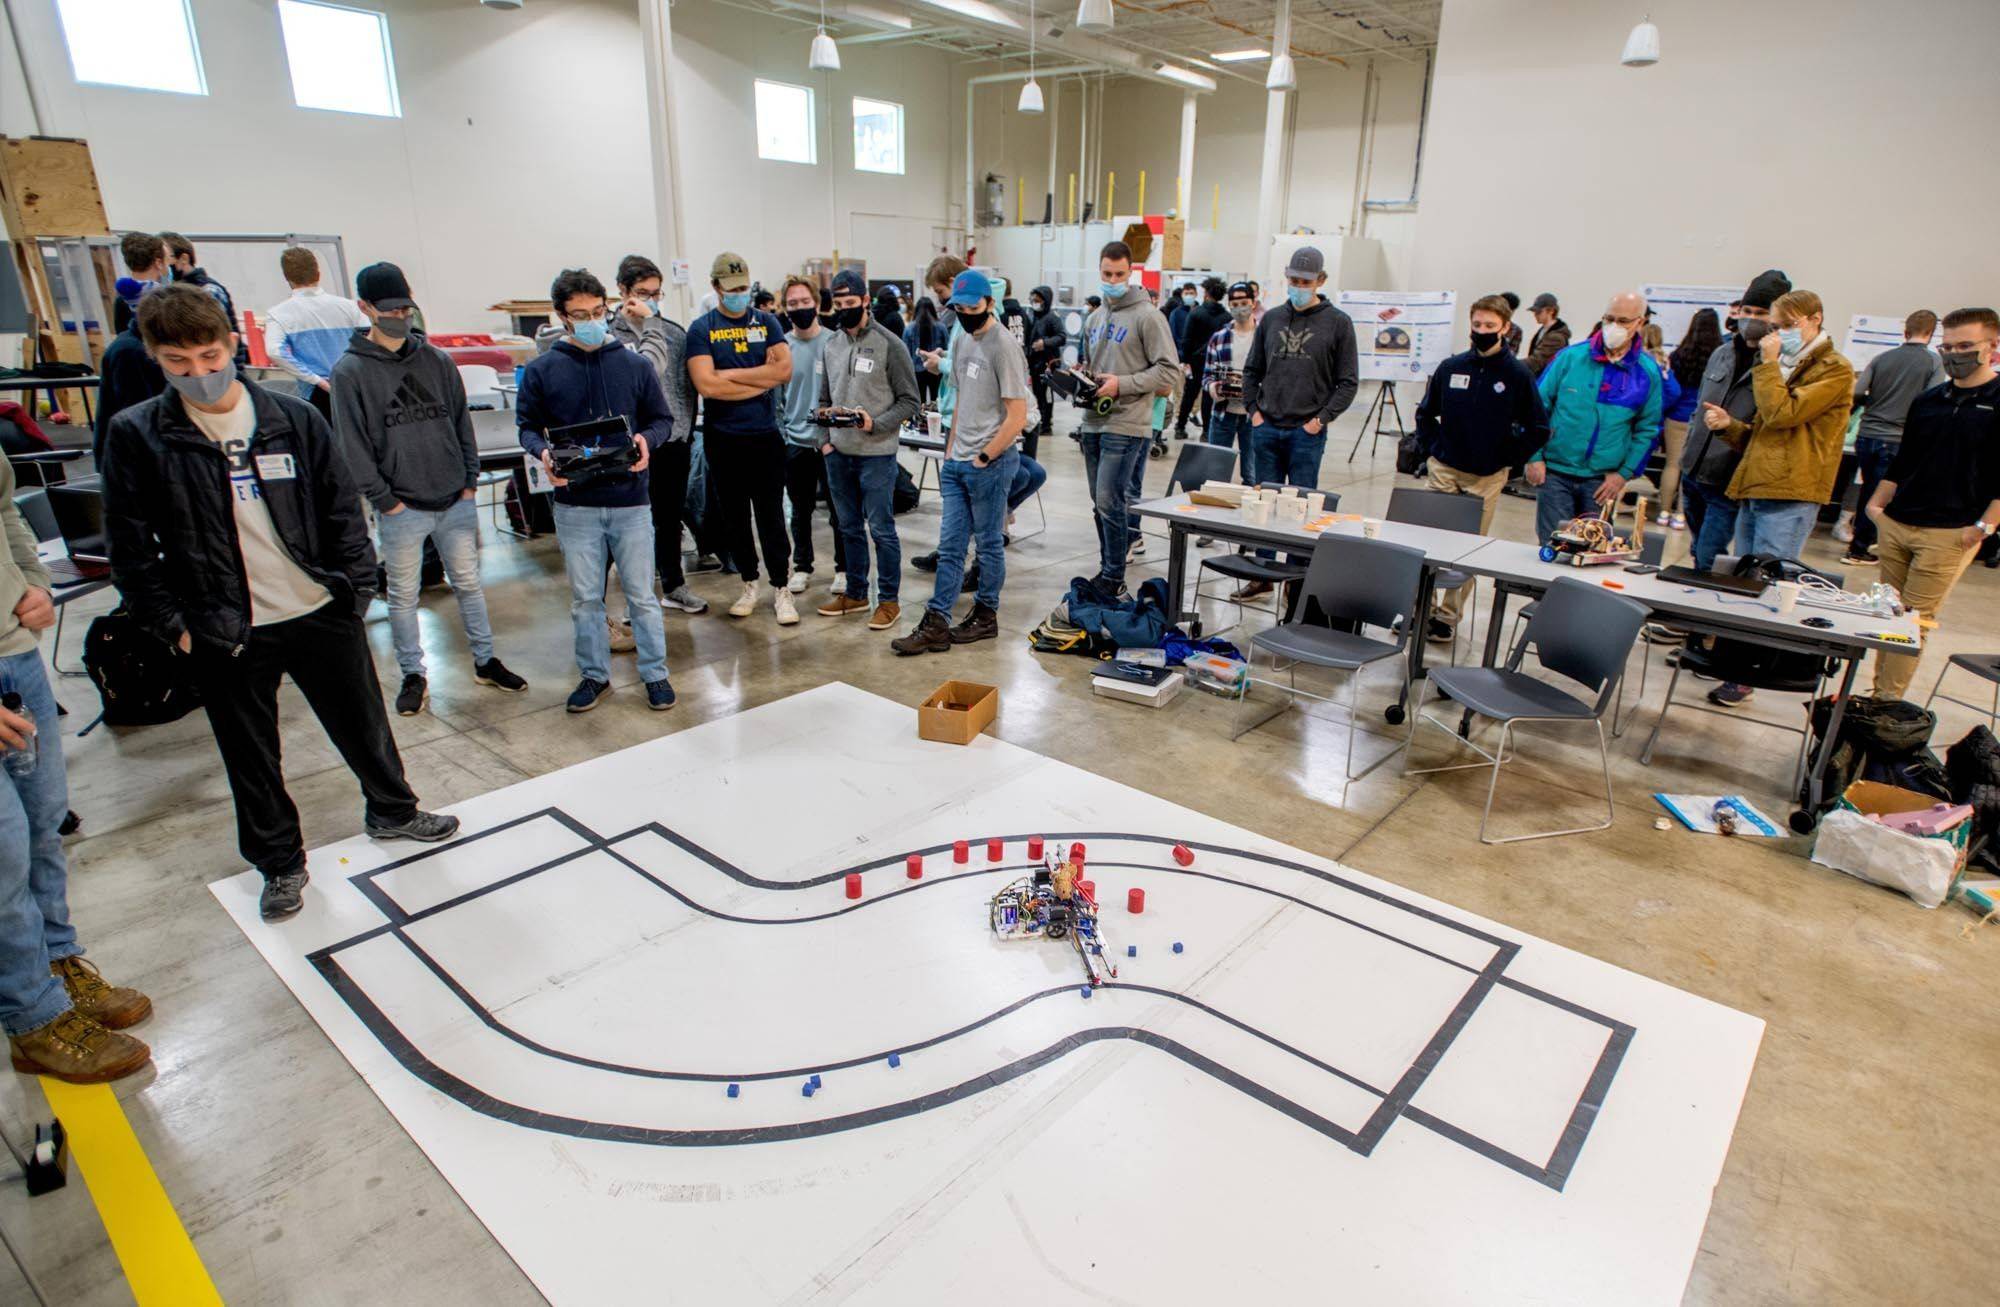 A crowd of visiting students watch a line-following robot on a robotics course at Project Day.